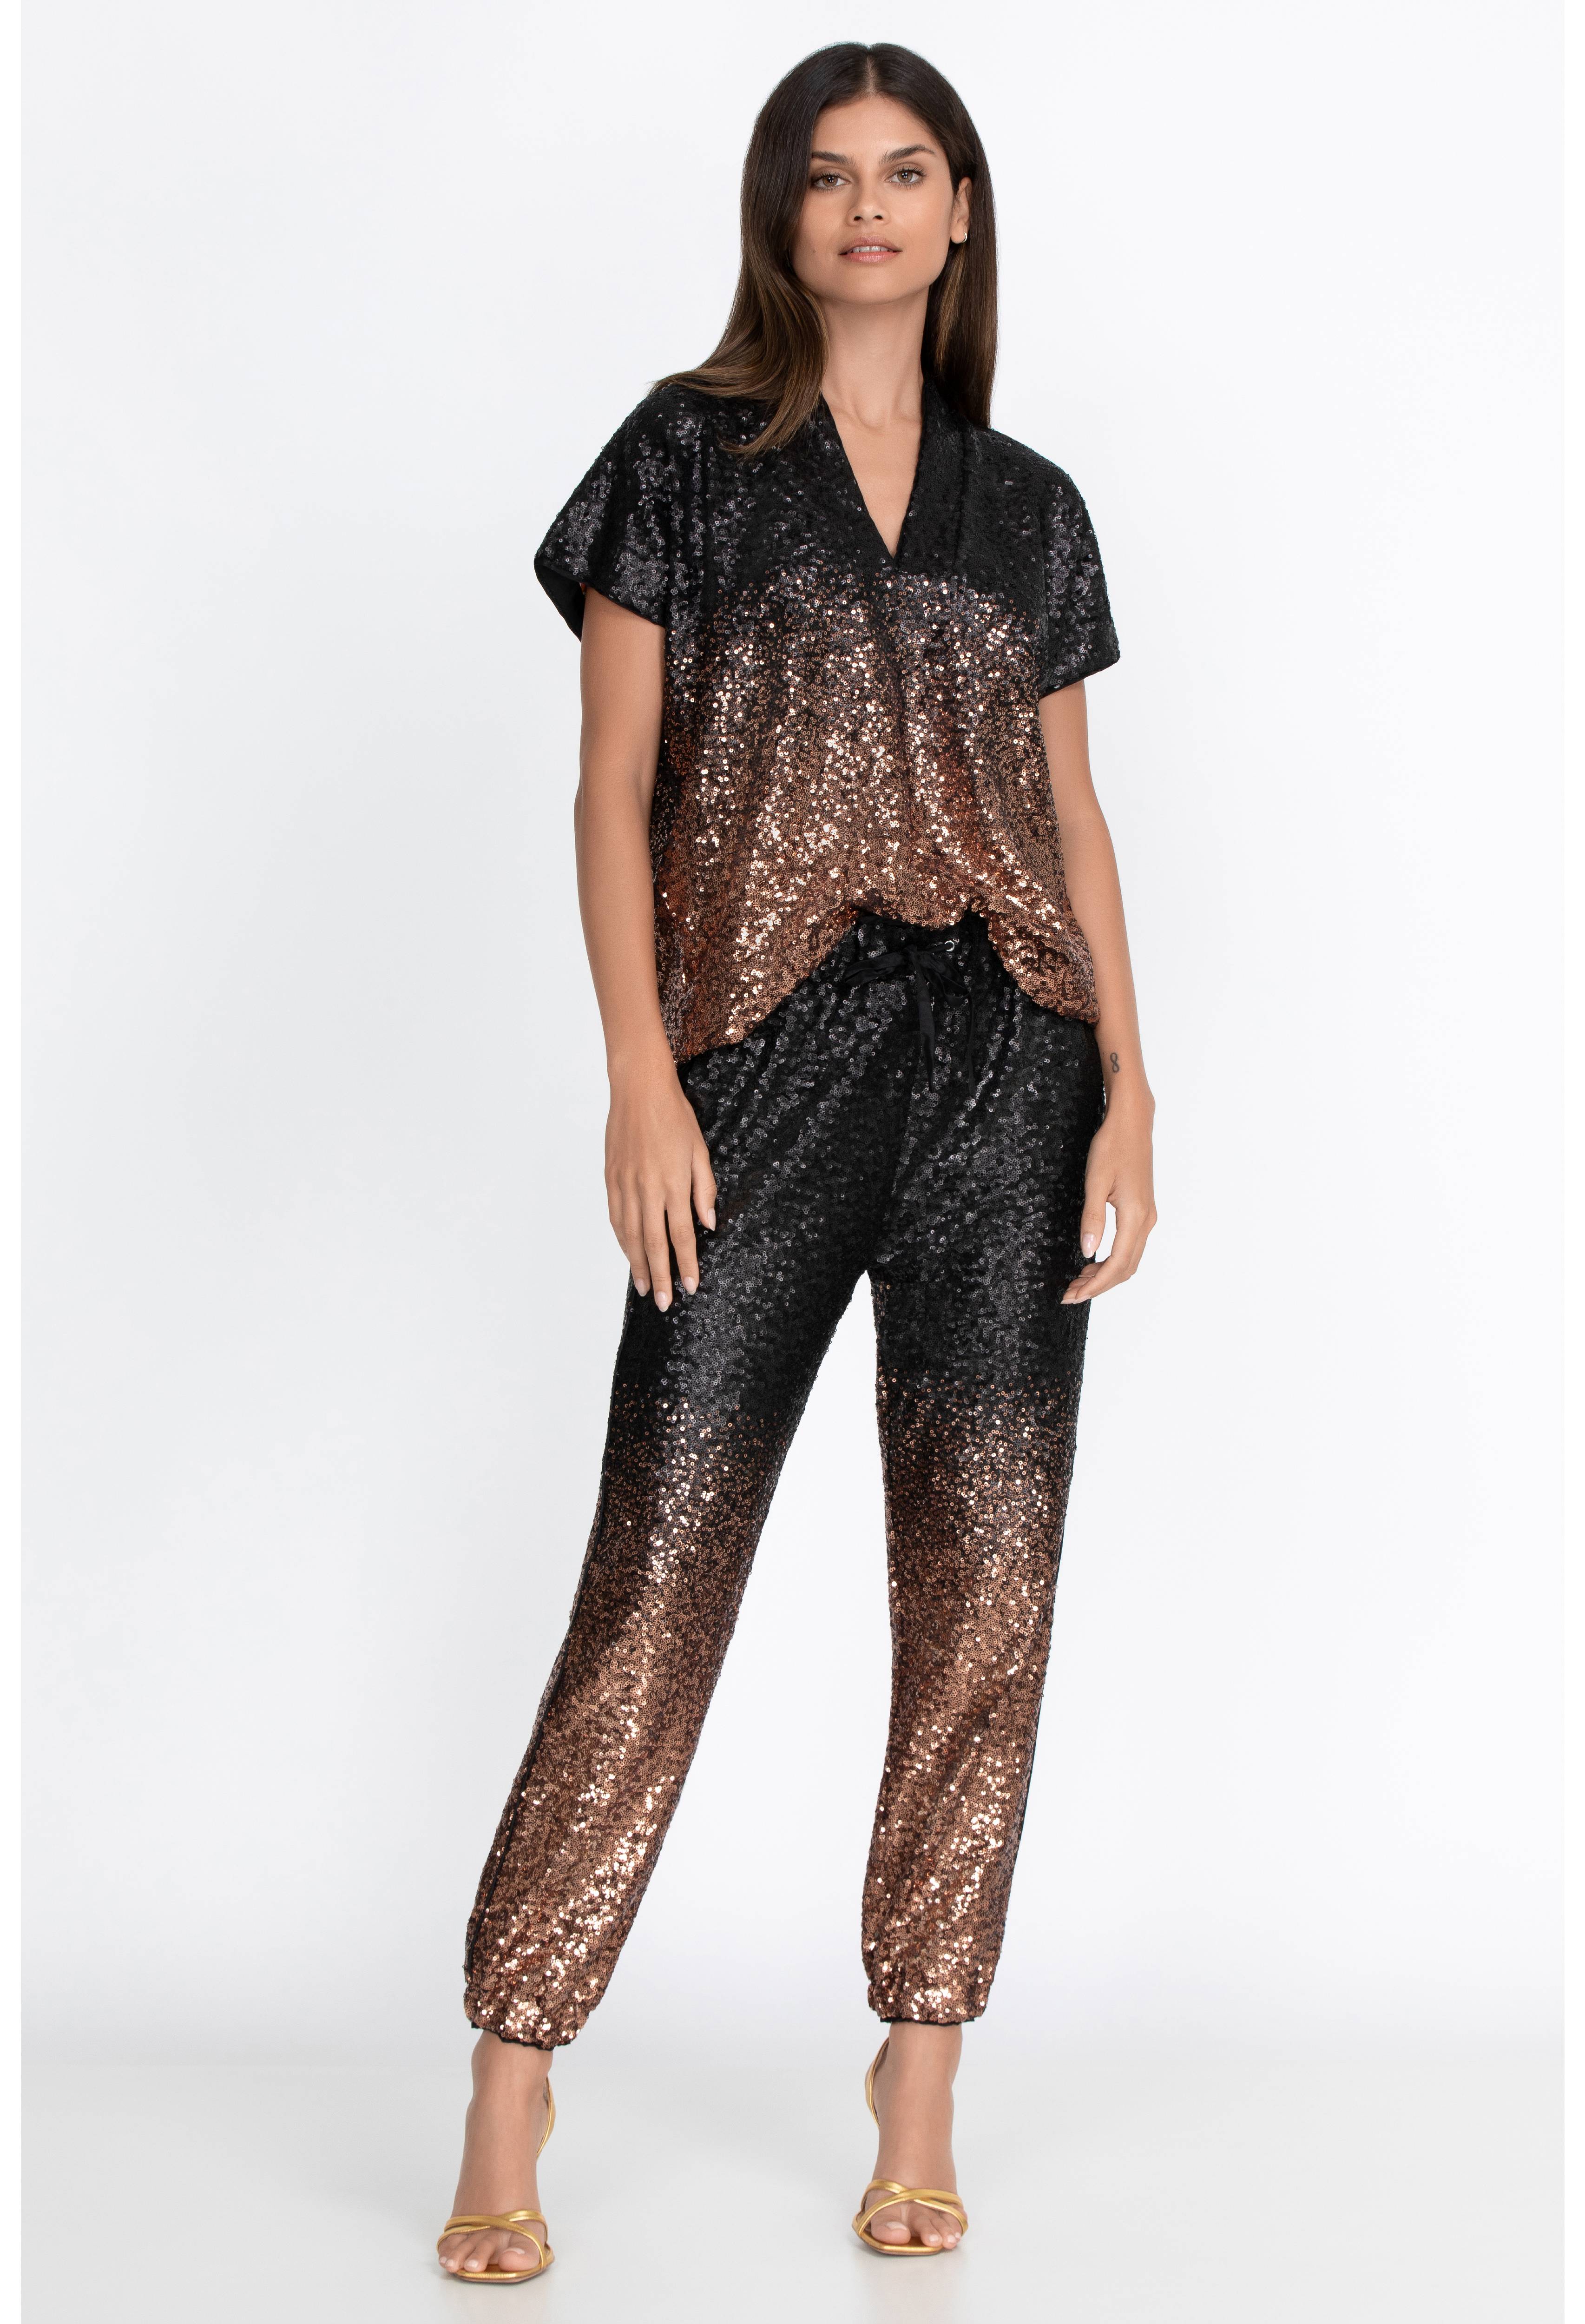 Sequin Gold Jett Jogger, , large image number 1